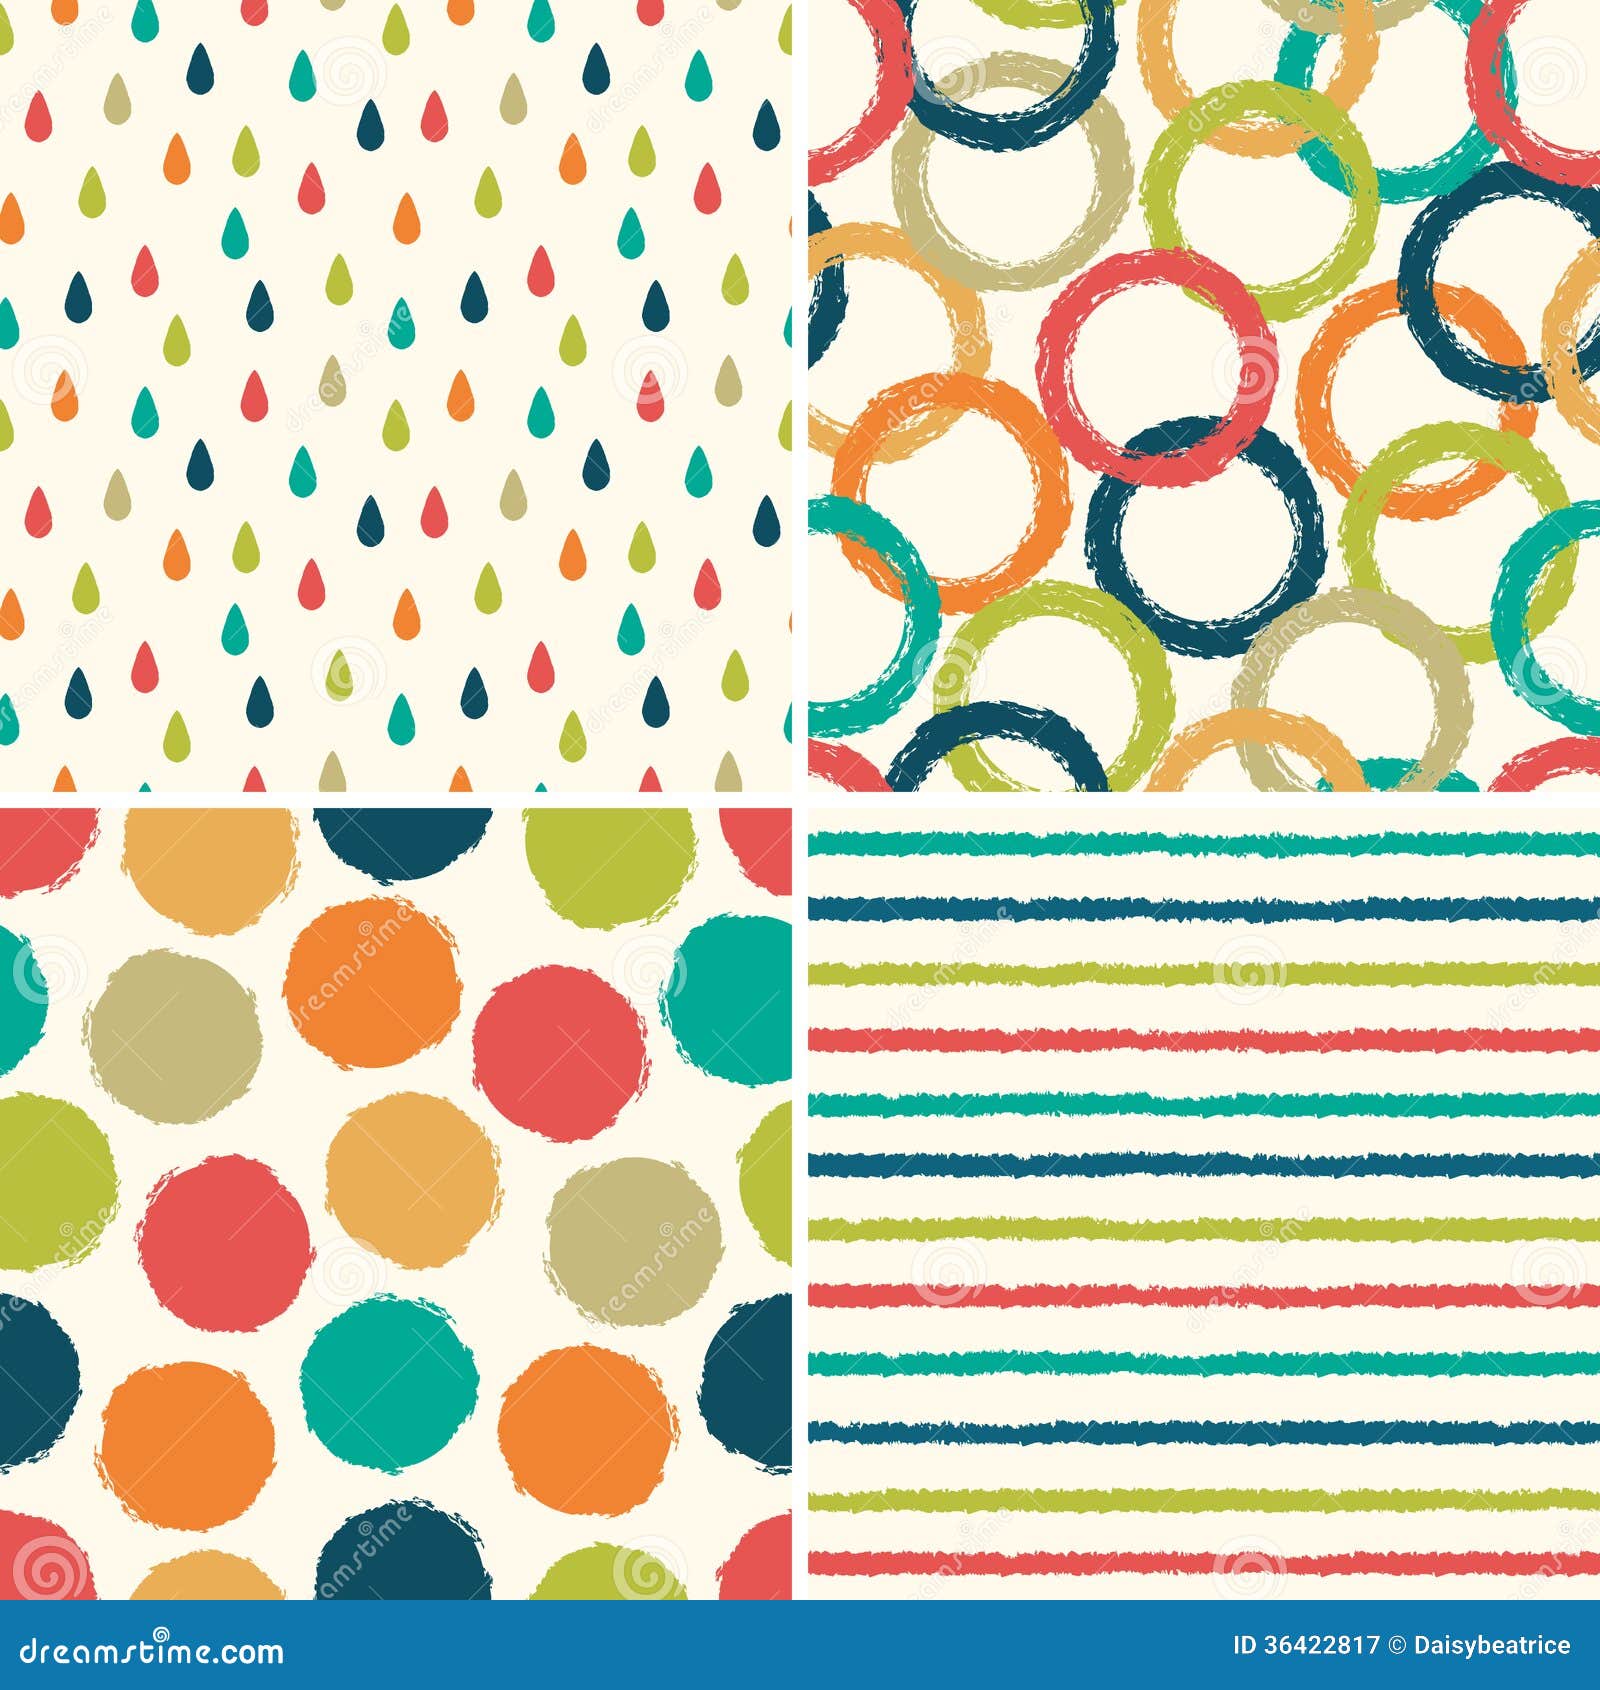 retro backgrounds tumblr > Gallery For Pattern Hipster Backgrounds